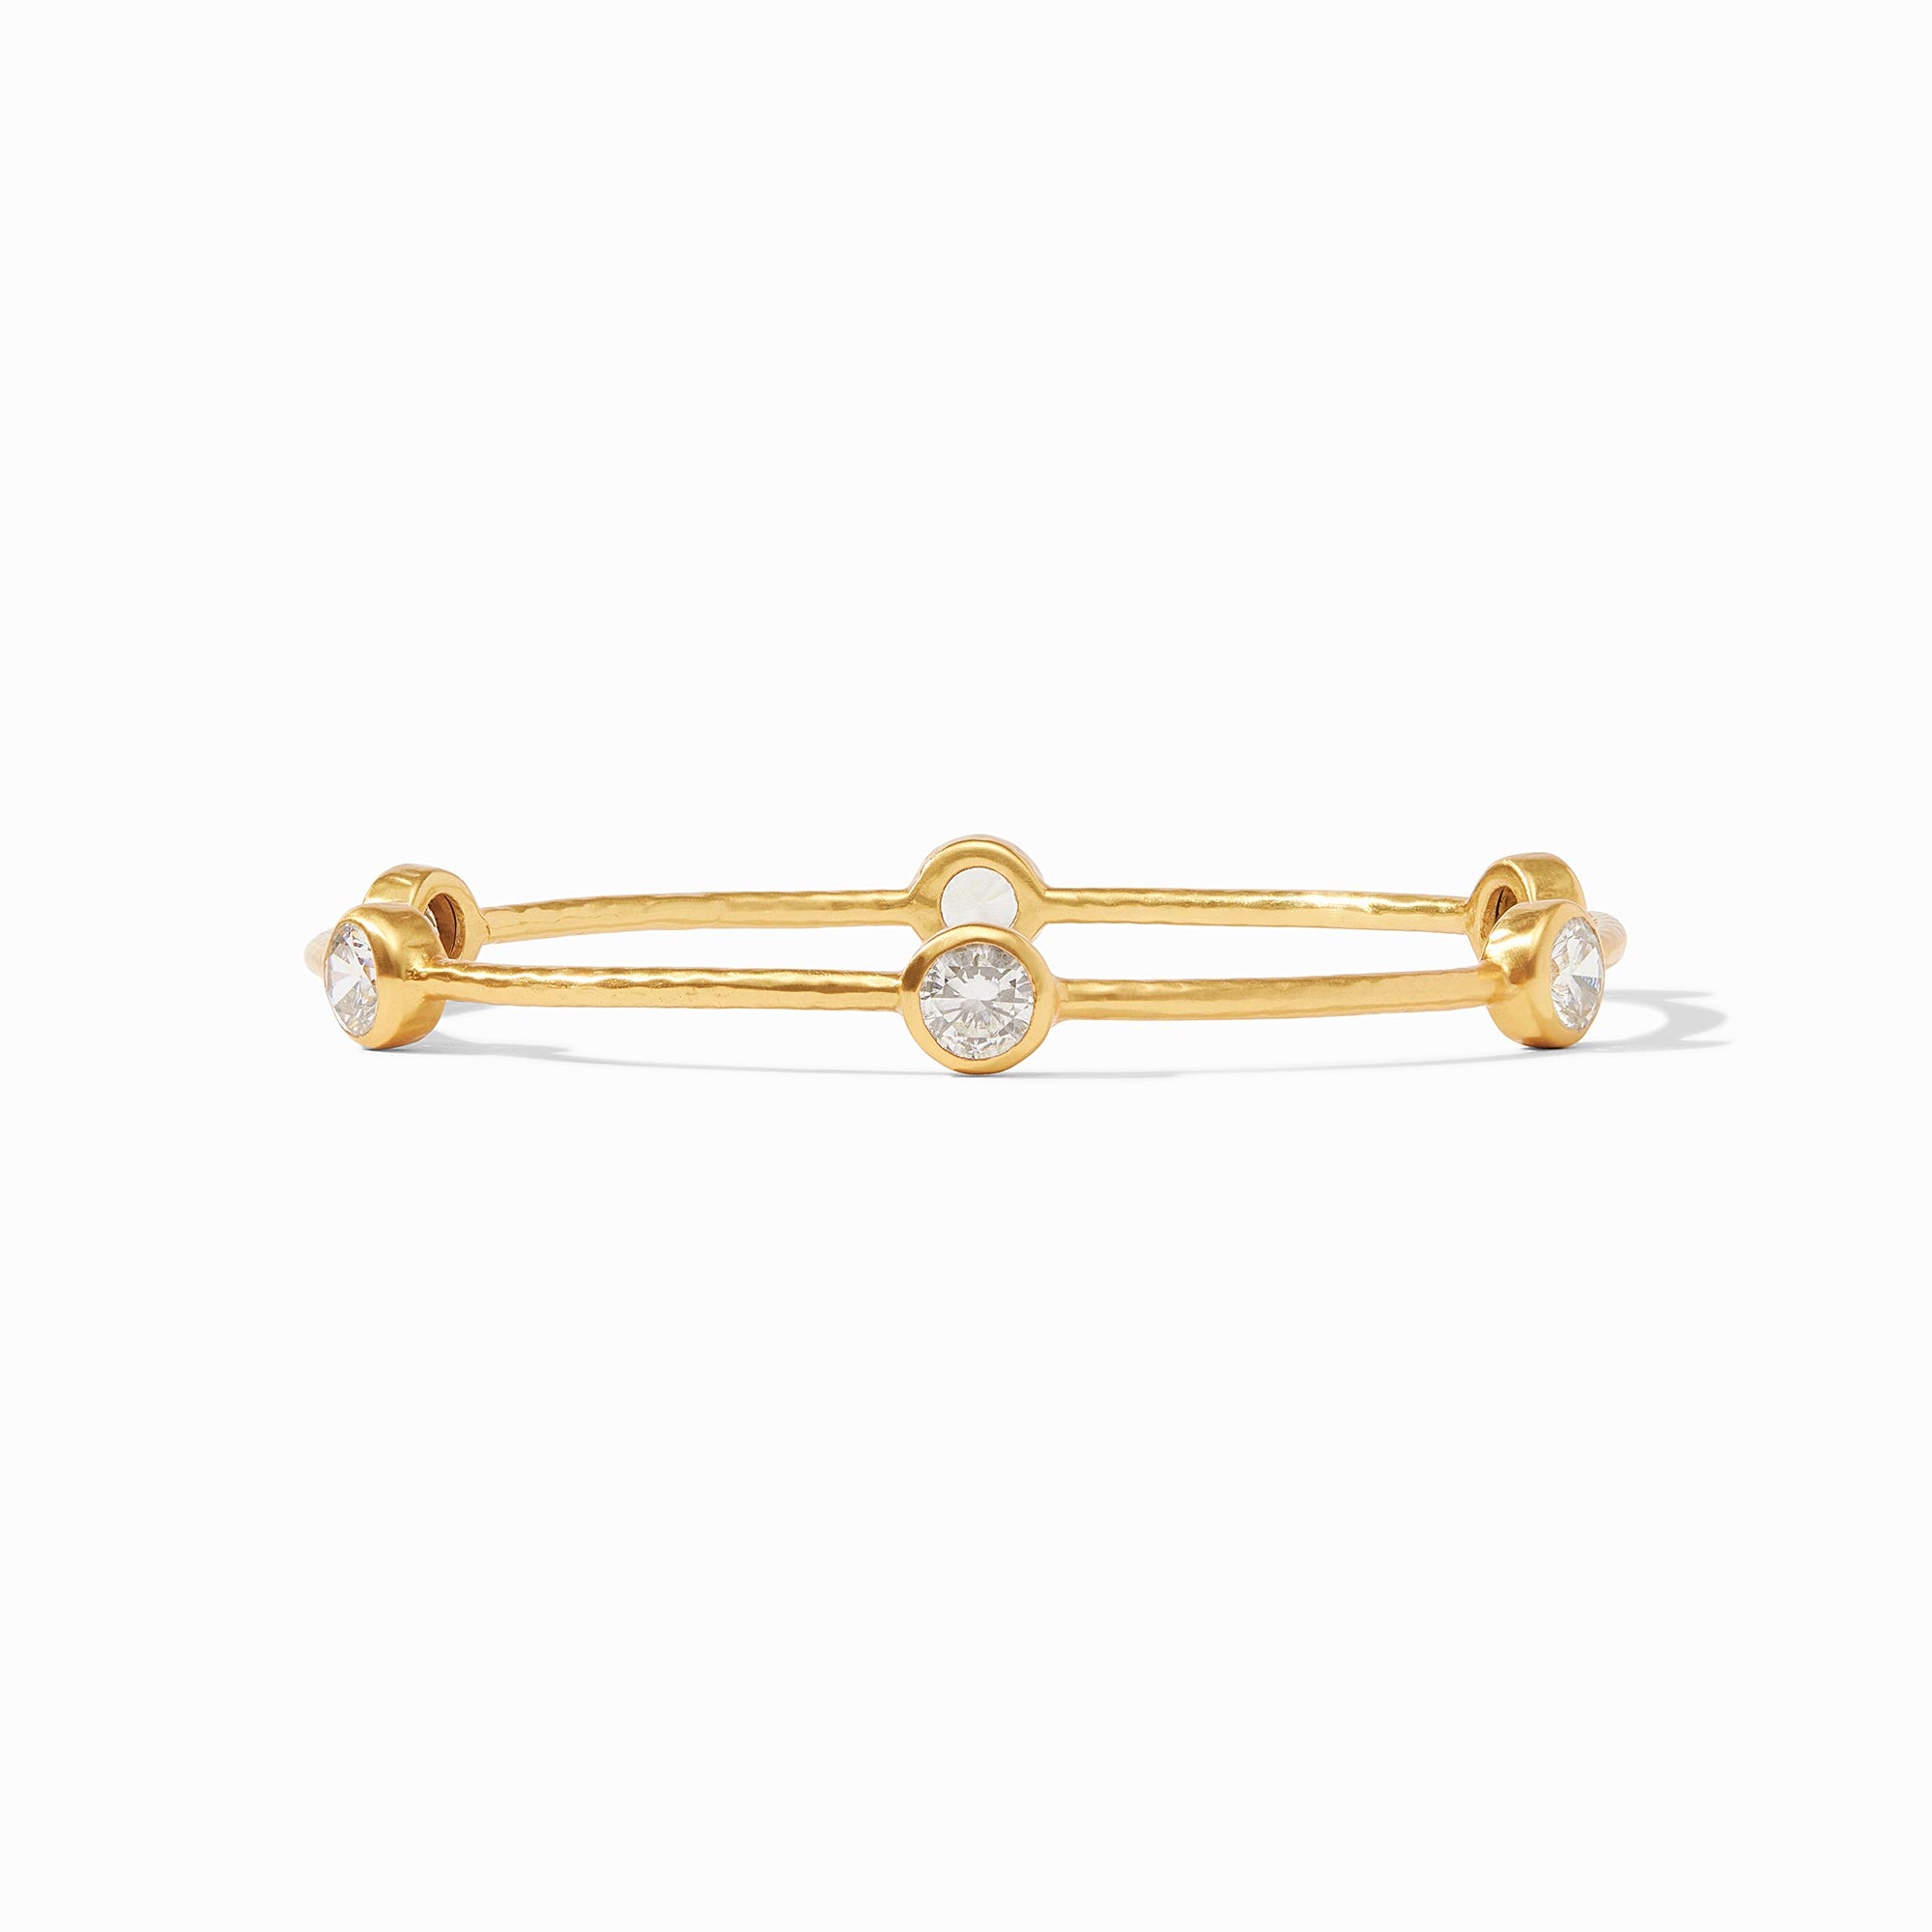 Gold Plated Bangle With Crystals